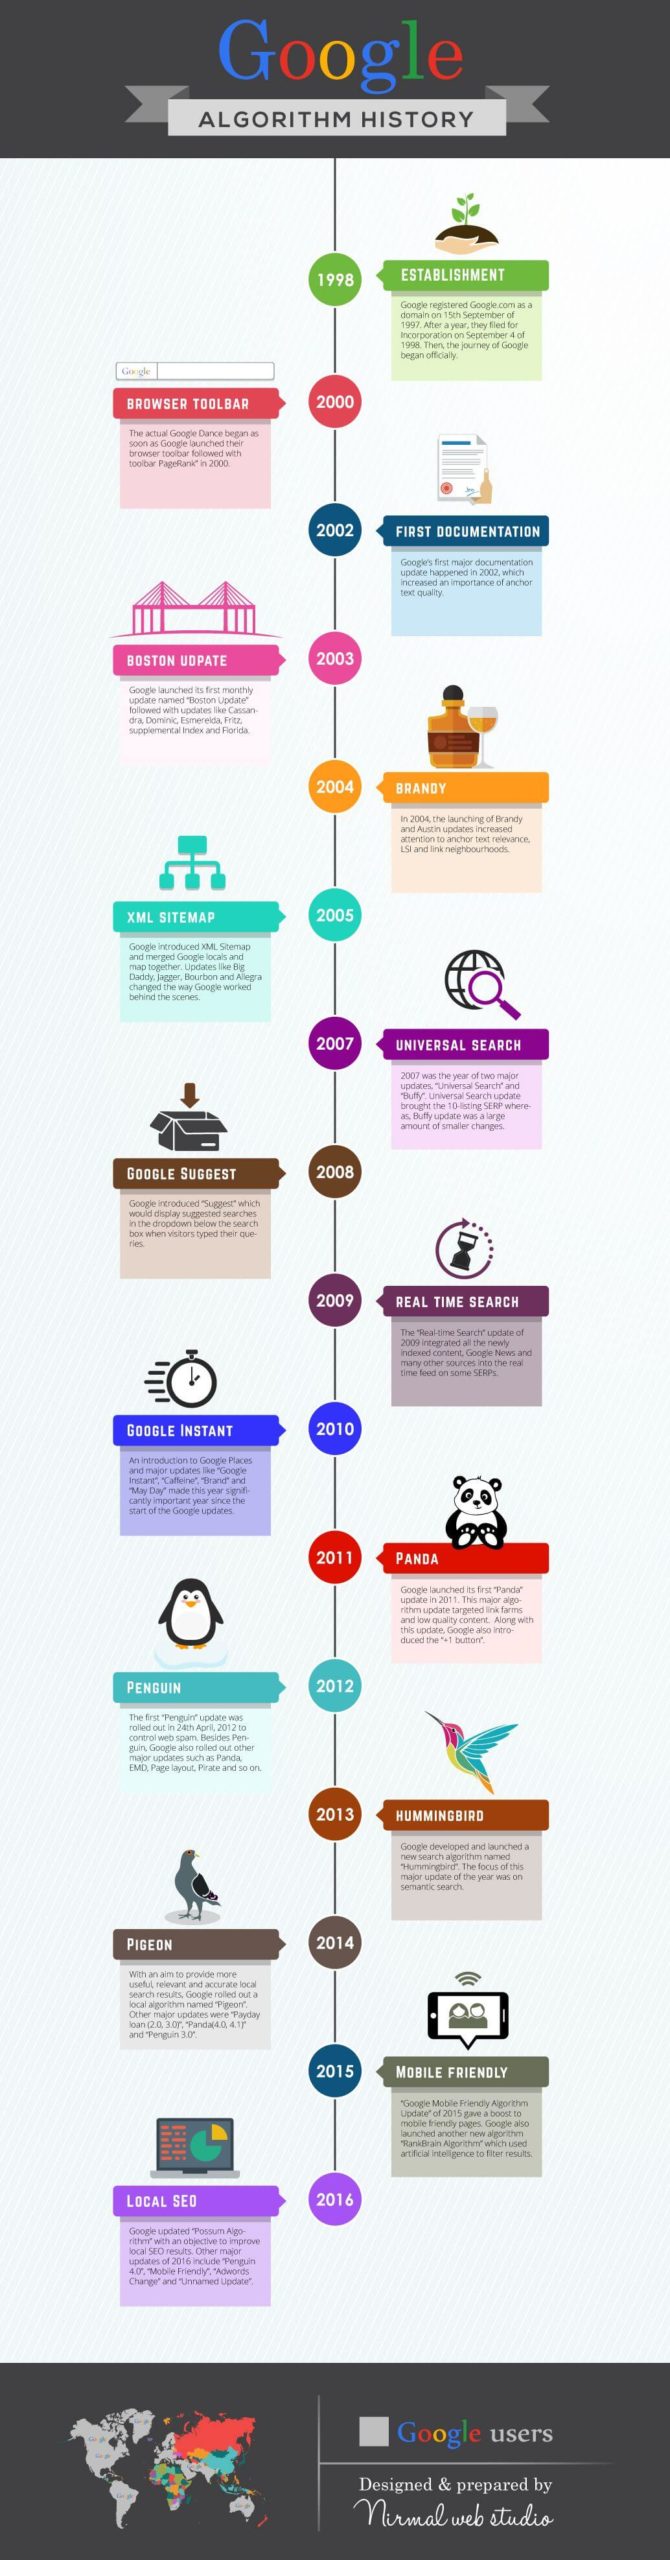 Google Algorithm Updates and Changes History